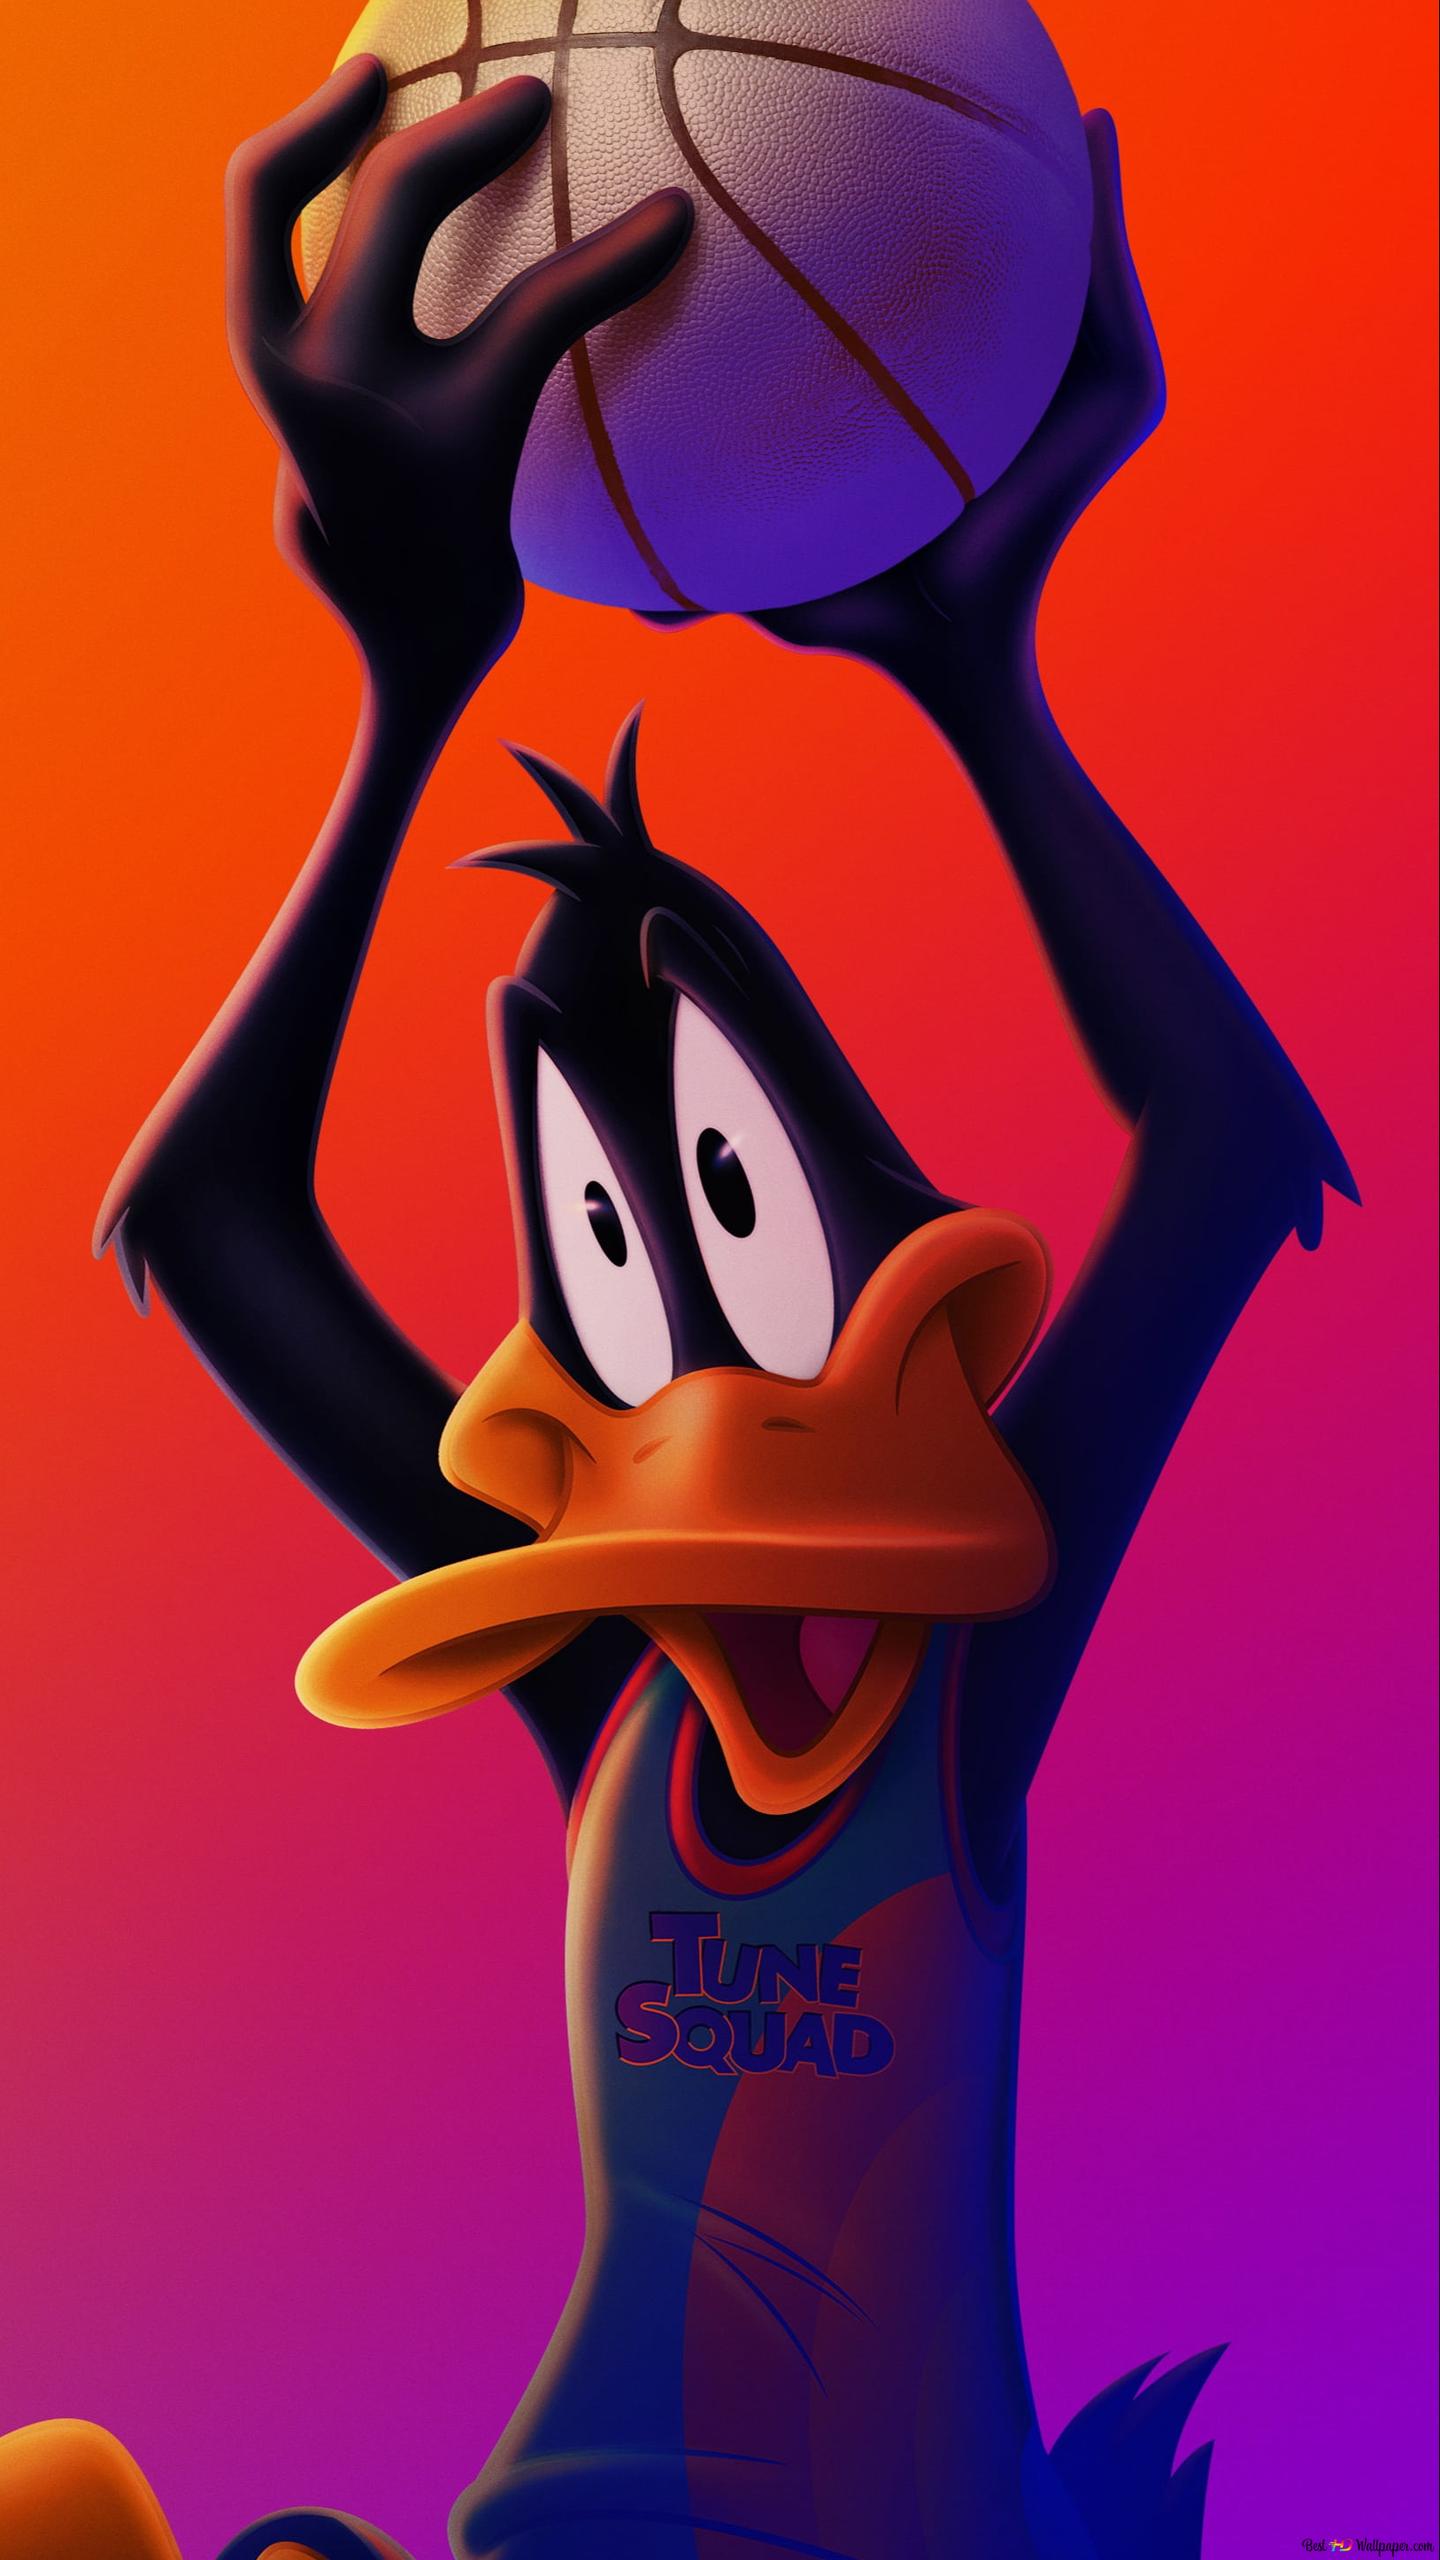 Daffy Duck cartoon character holding basketball ball looking cheerful in front of red purple background HD wallpaper download